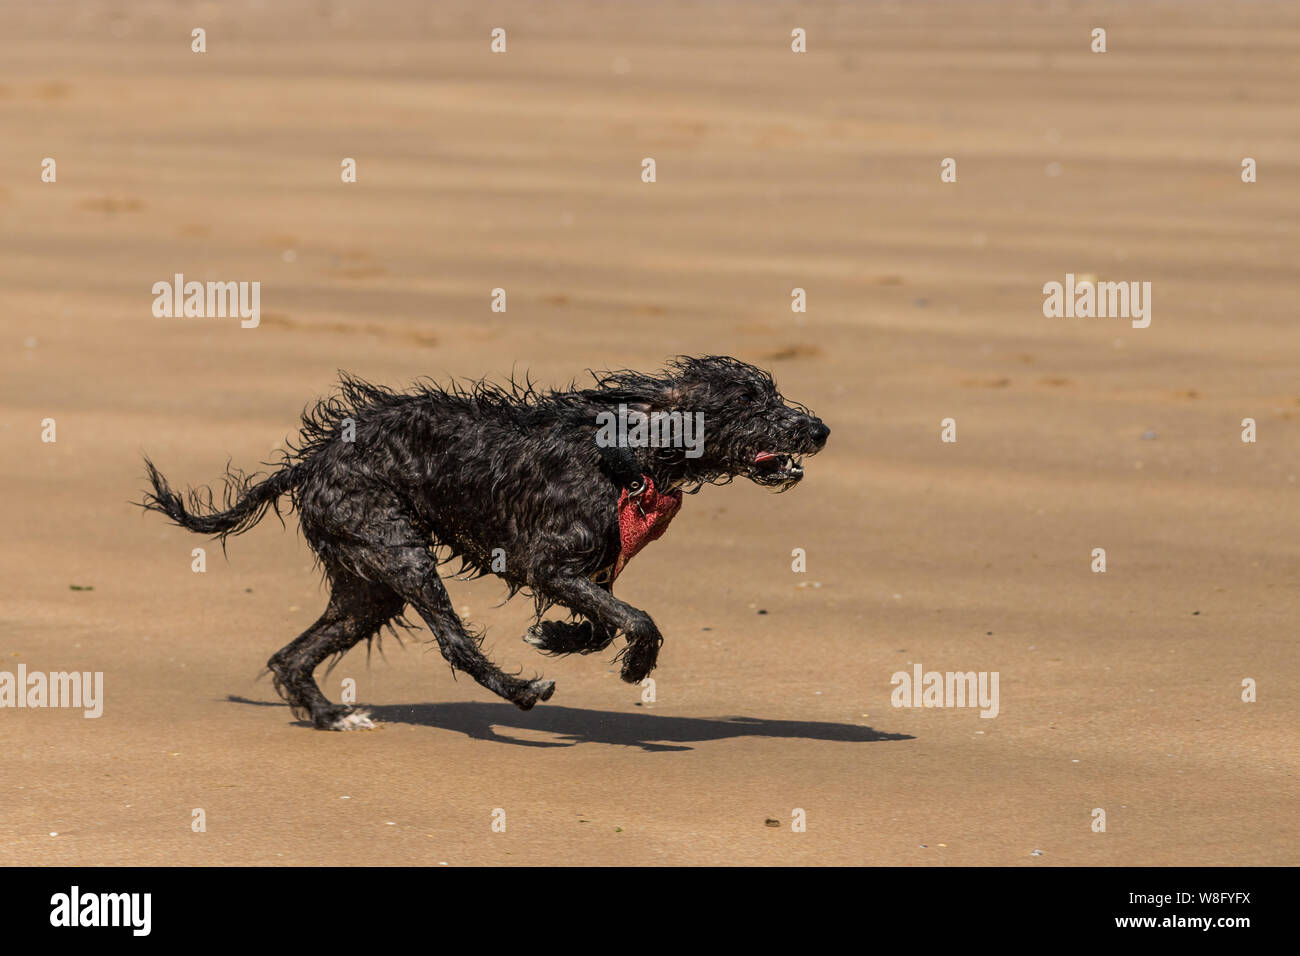 A shaggy wet dog chasing a ball on the beach Stock Photo